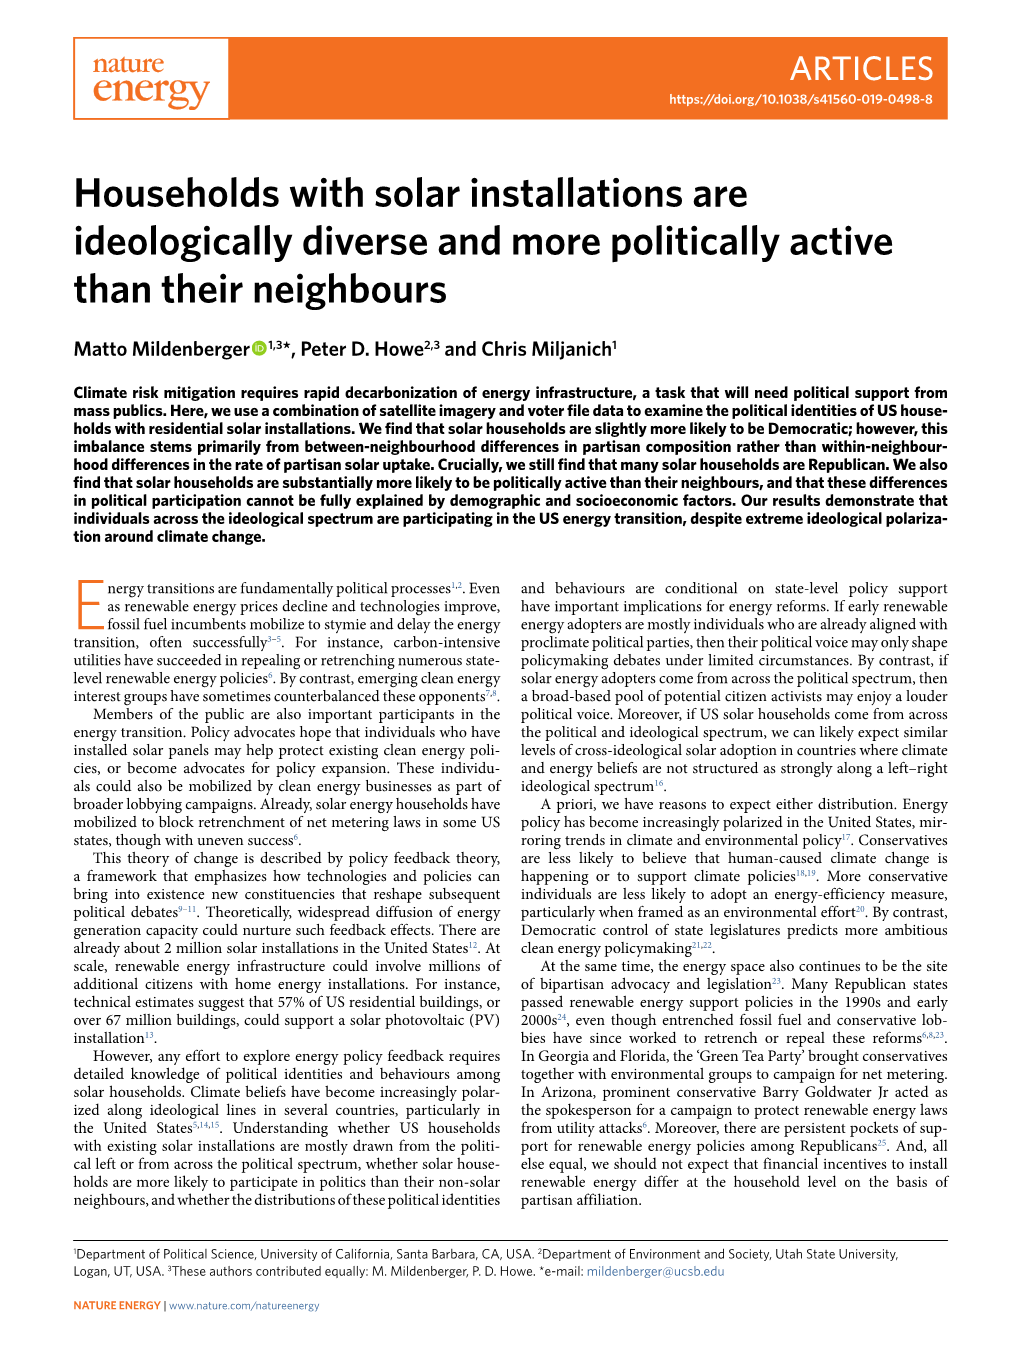 Households with Solar Installations Are Ideologically Diverse and More Politically Active Than Their Neighbours